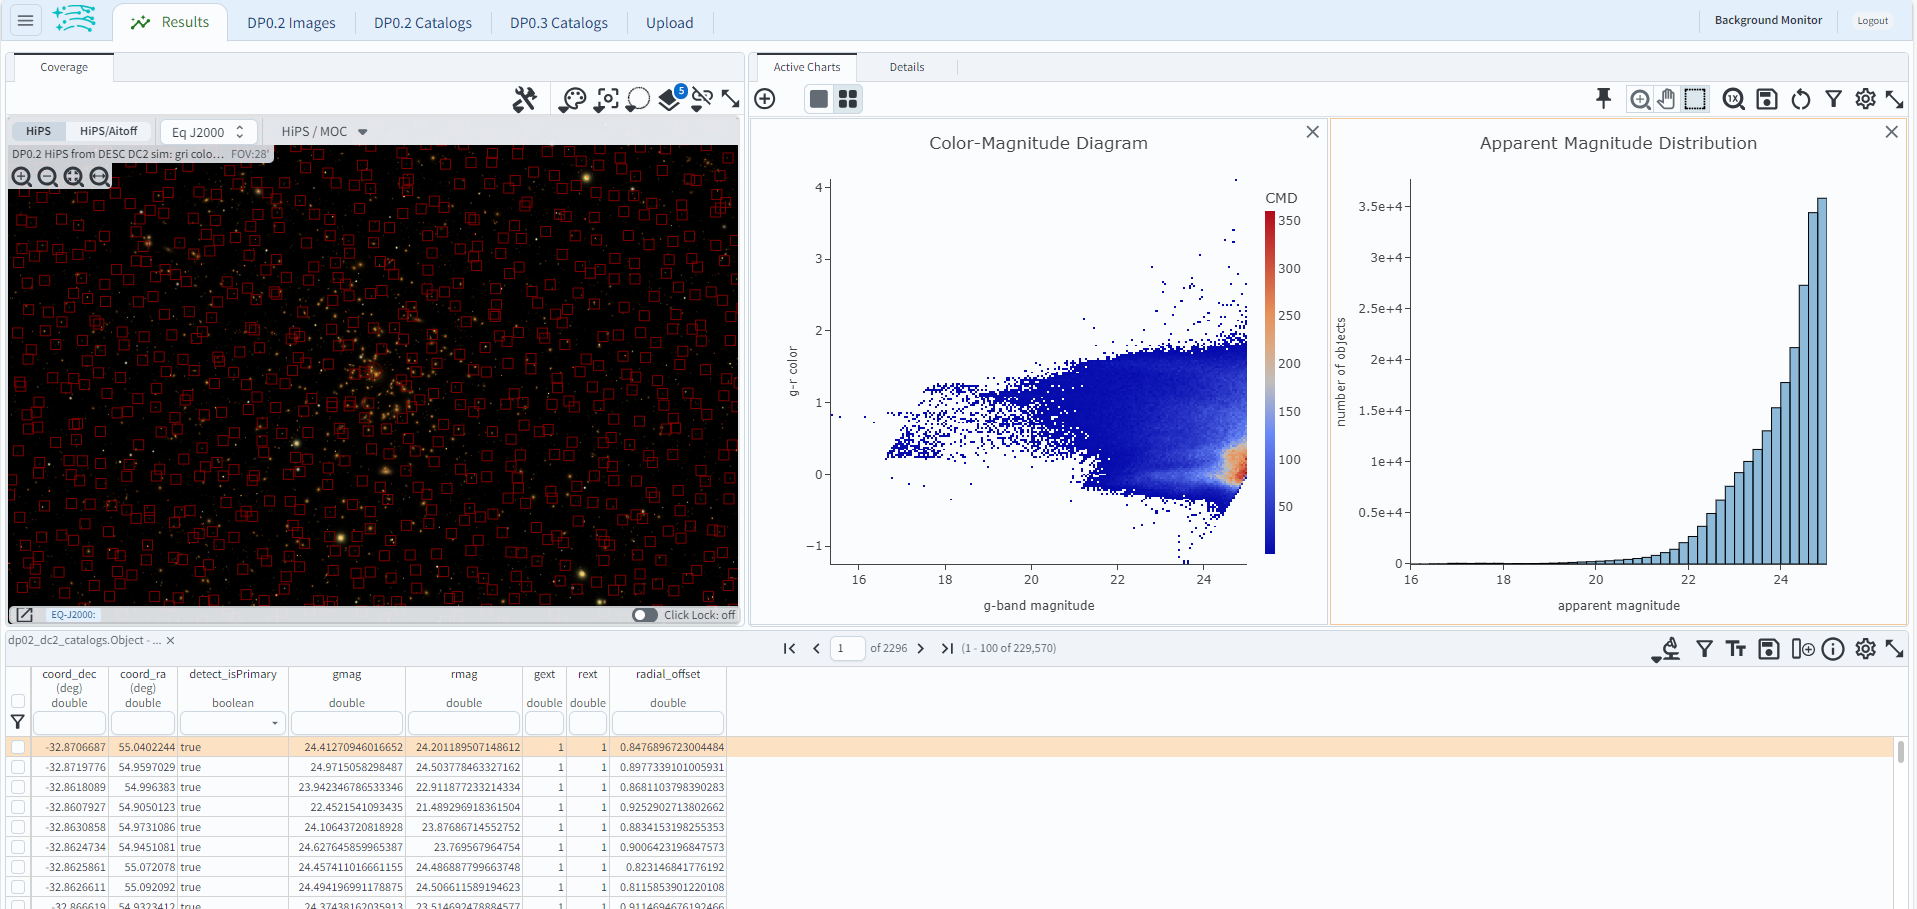 A screenshot of the portal's results view showing both the color-magnitude heatmap and the magnitude histogram.